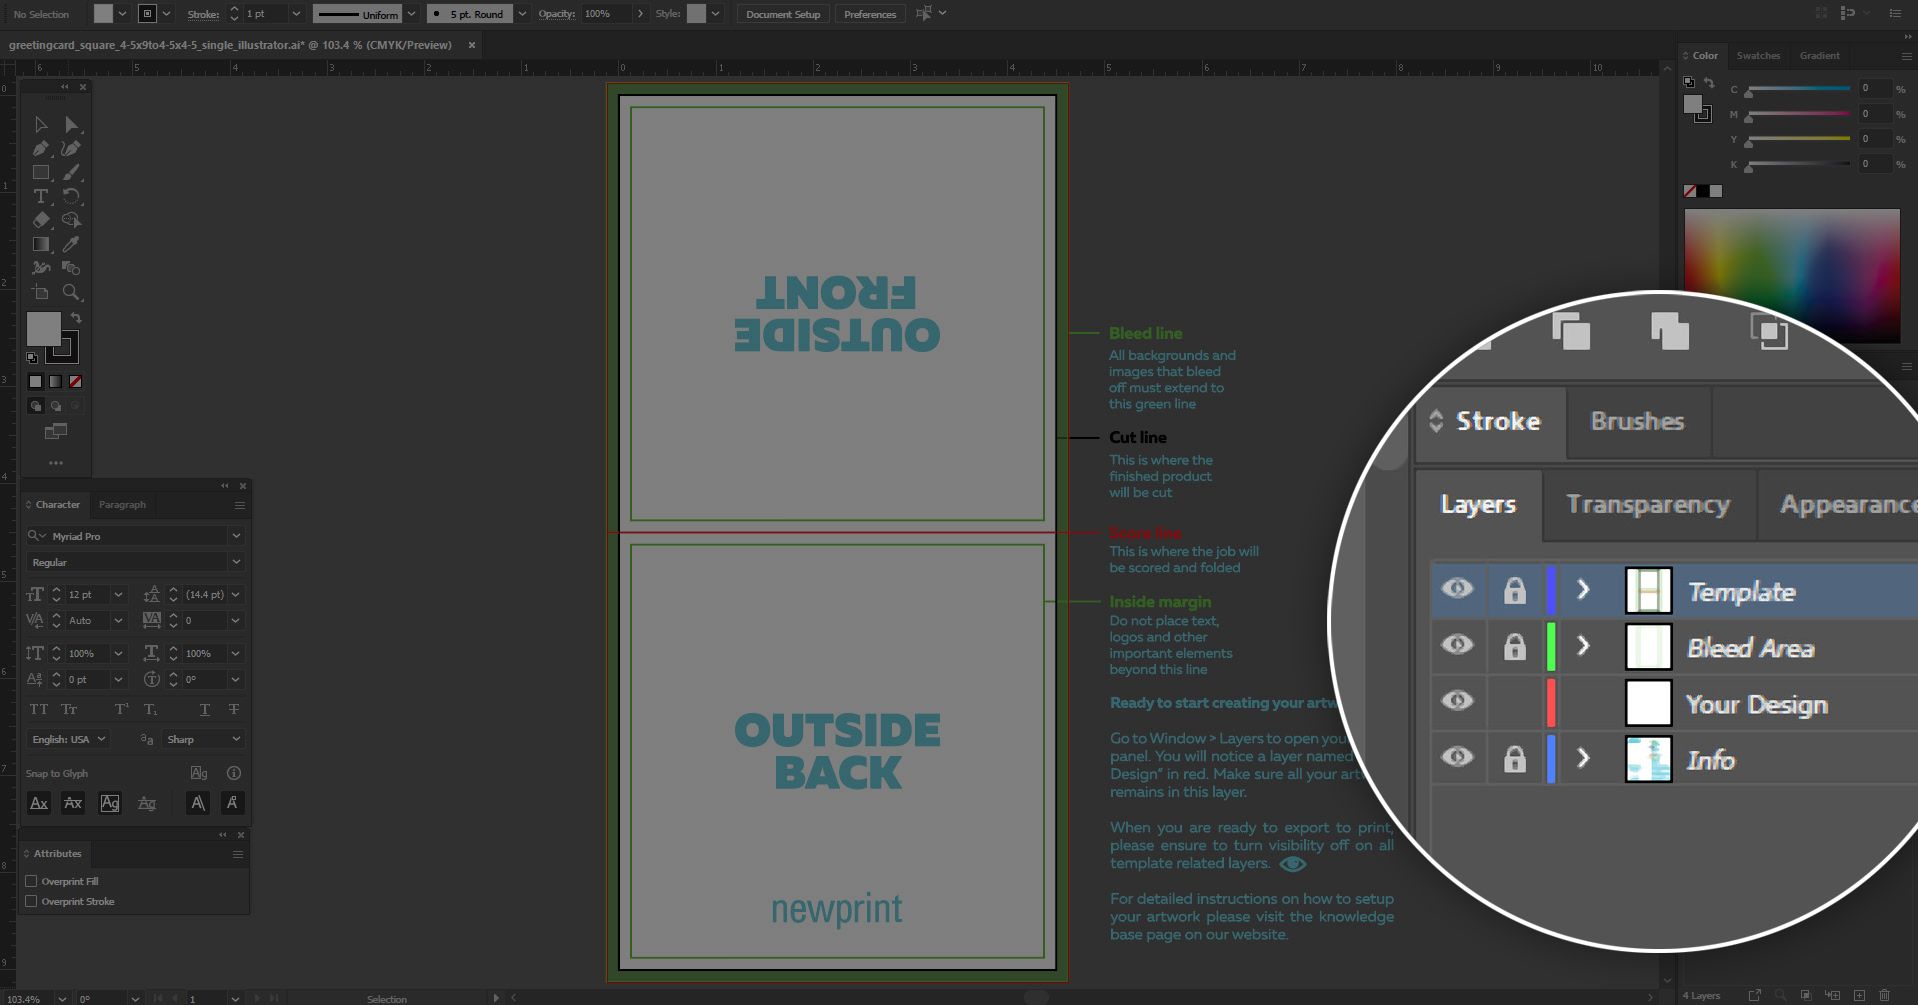 A screen shot of a blank Adobe Illustrator print template showing the layer structure of the template.